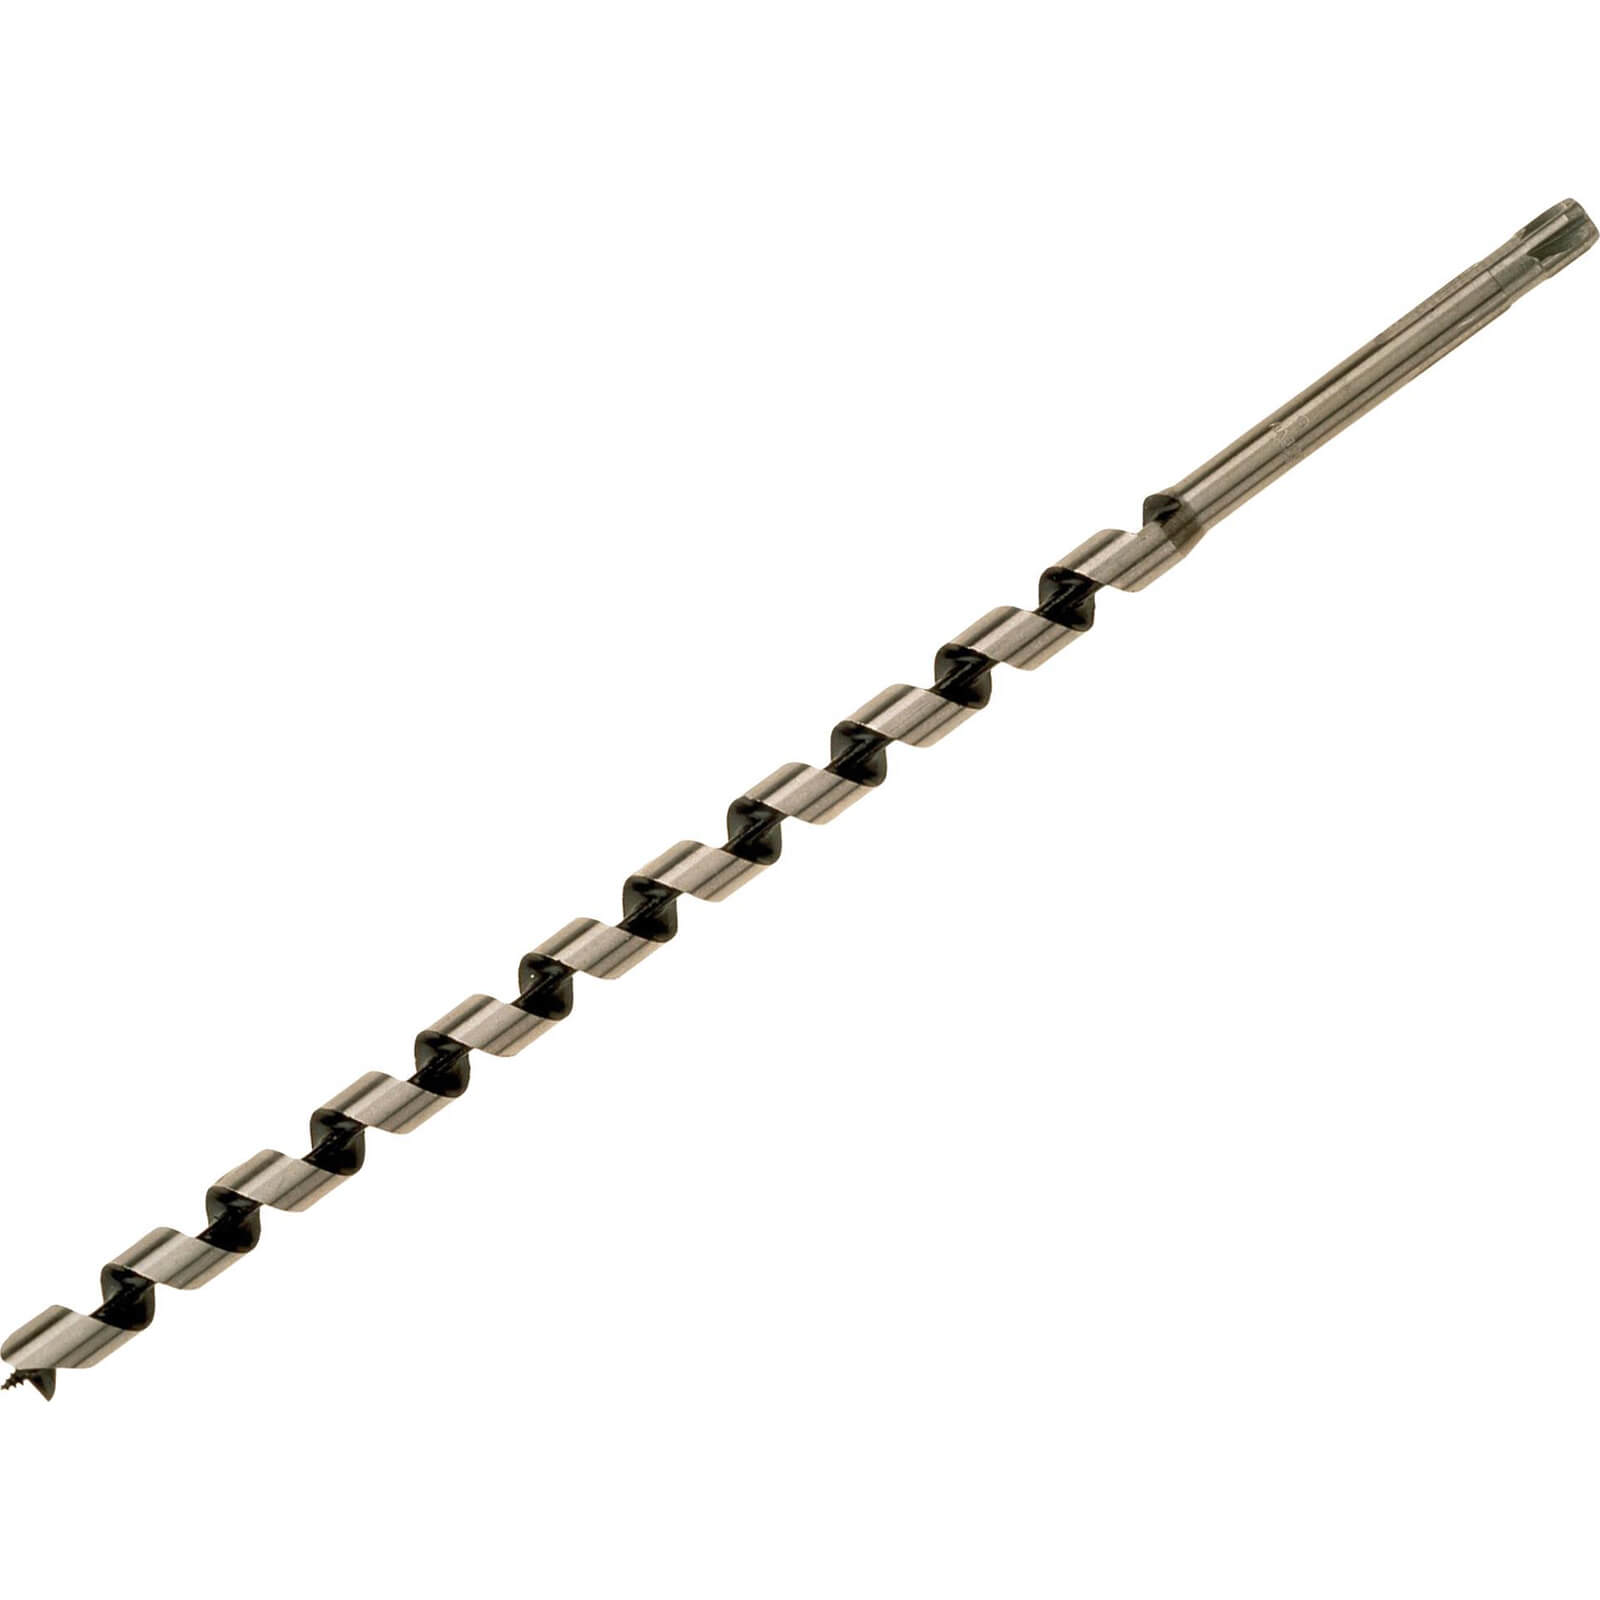 Photo of Bahco 9627 Series Long Combination Auger Drill Bit 8mm 460mm